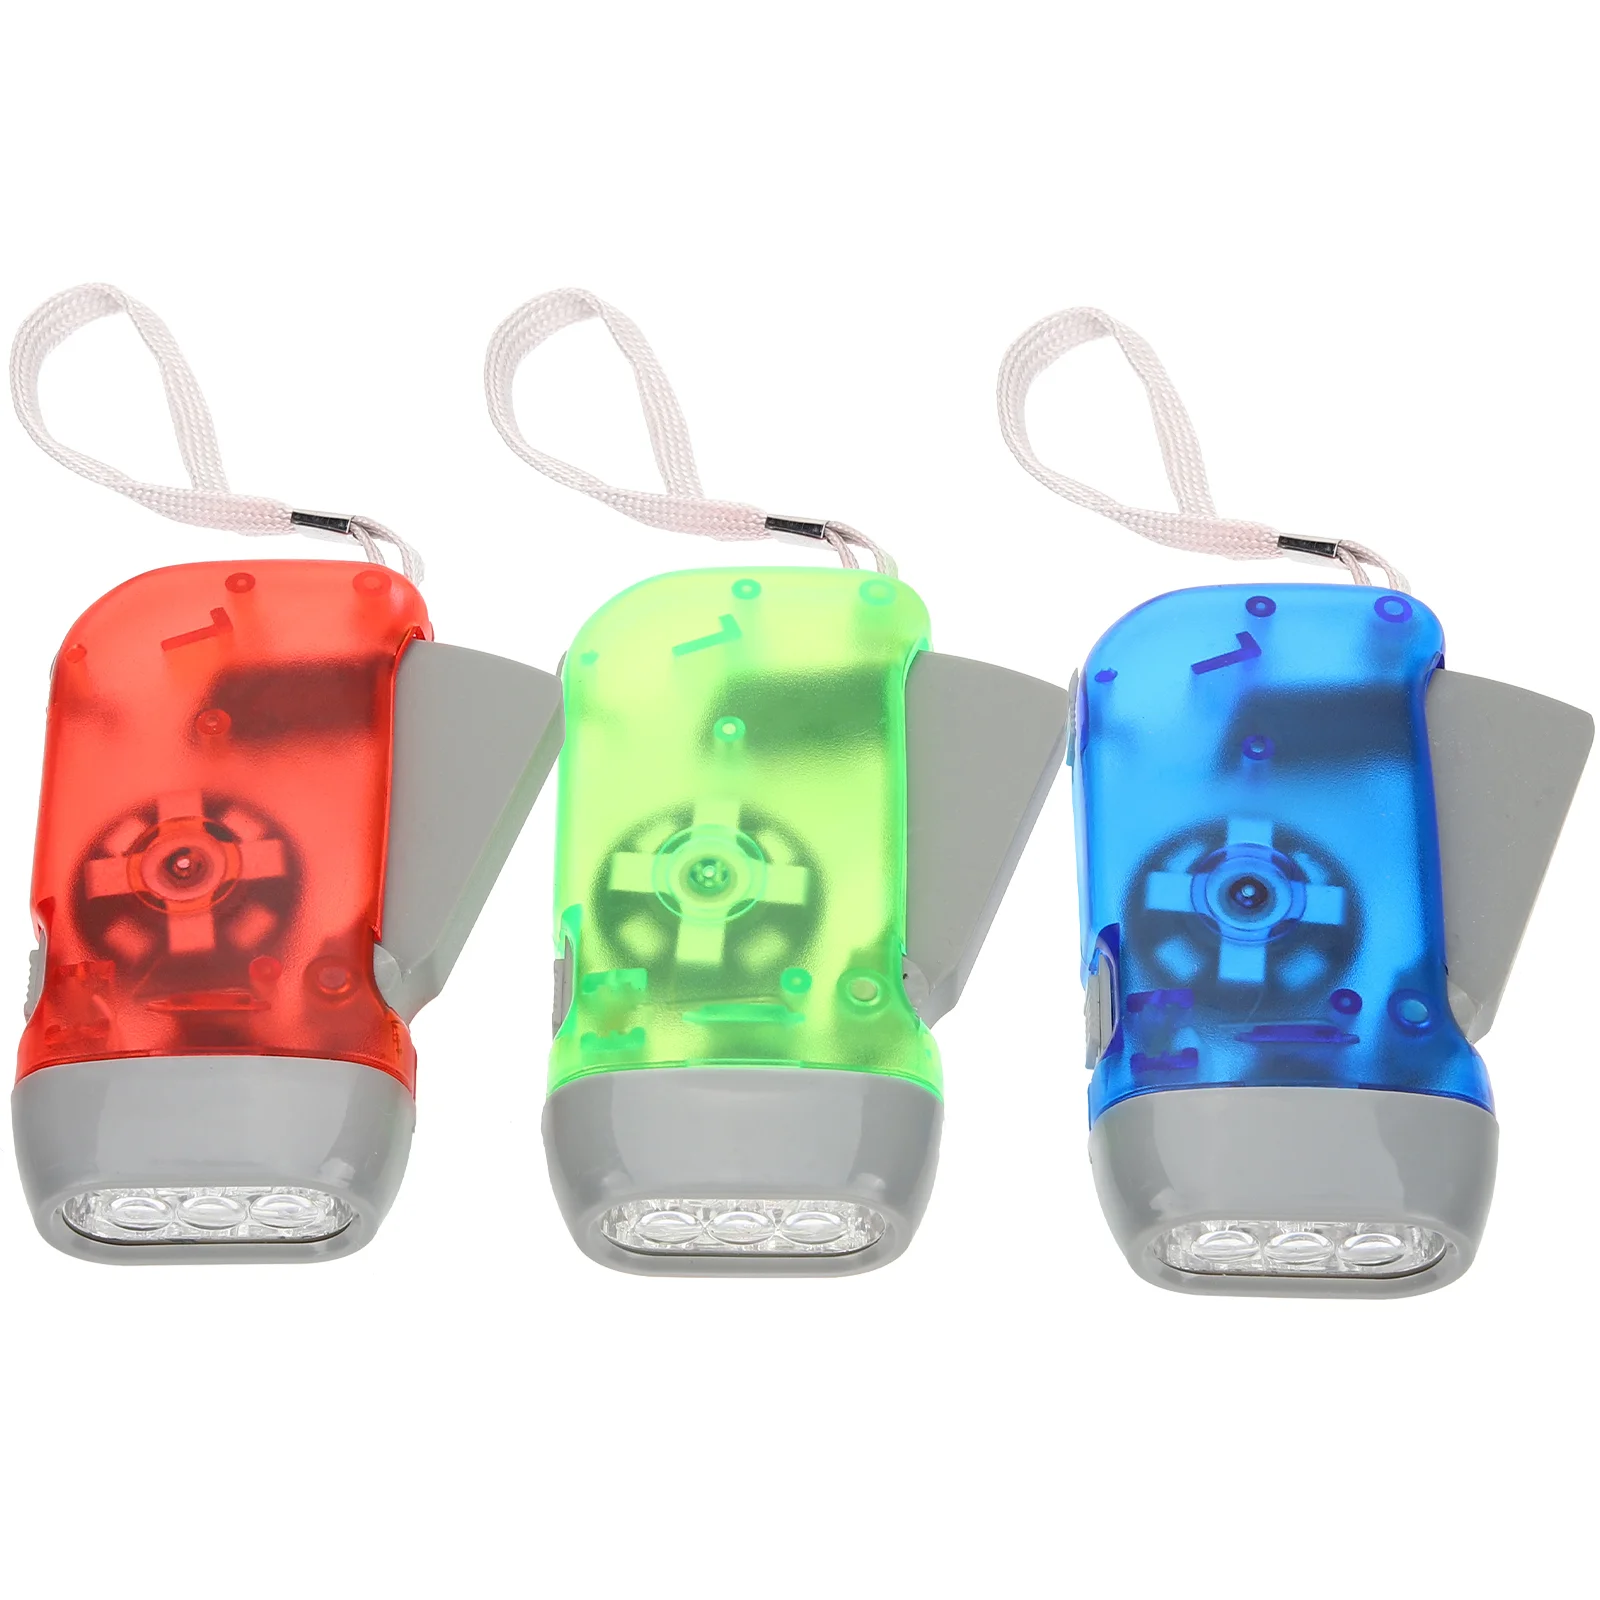 

3 Pcs Hand Crank Flashlight Camping Flashlights Emergency Torch Small Rechargeable Plastic LED